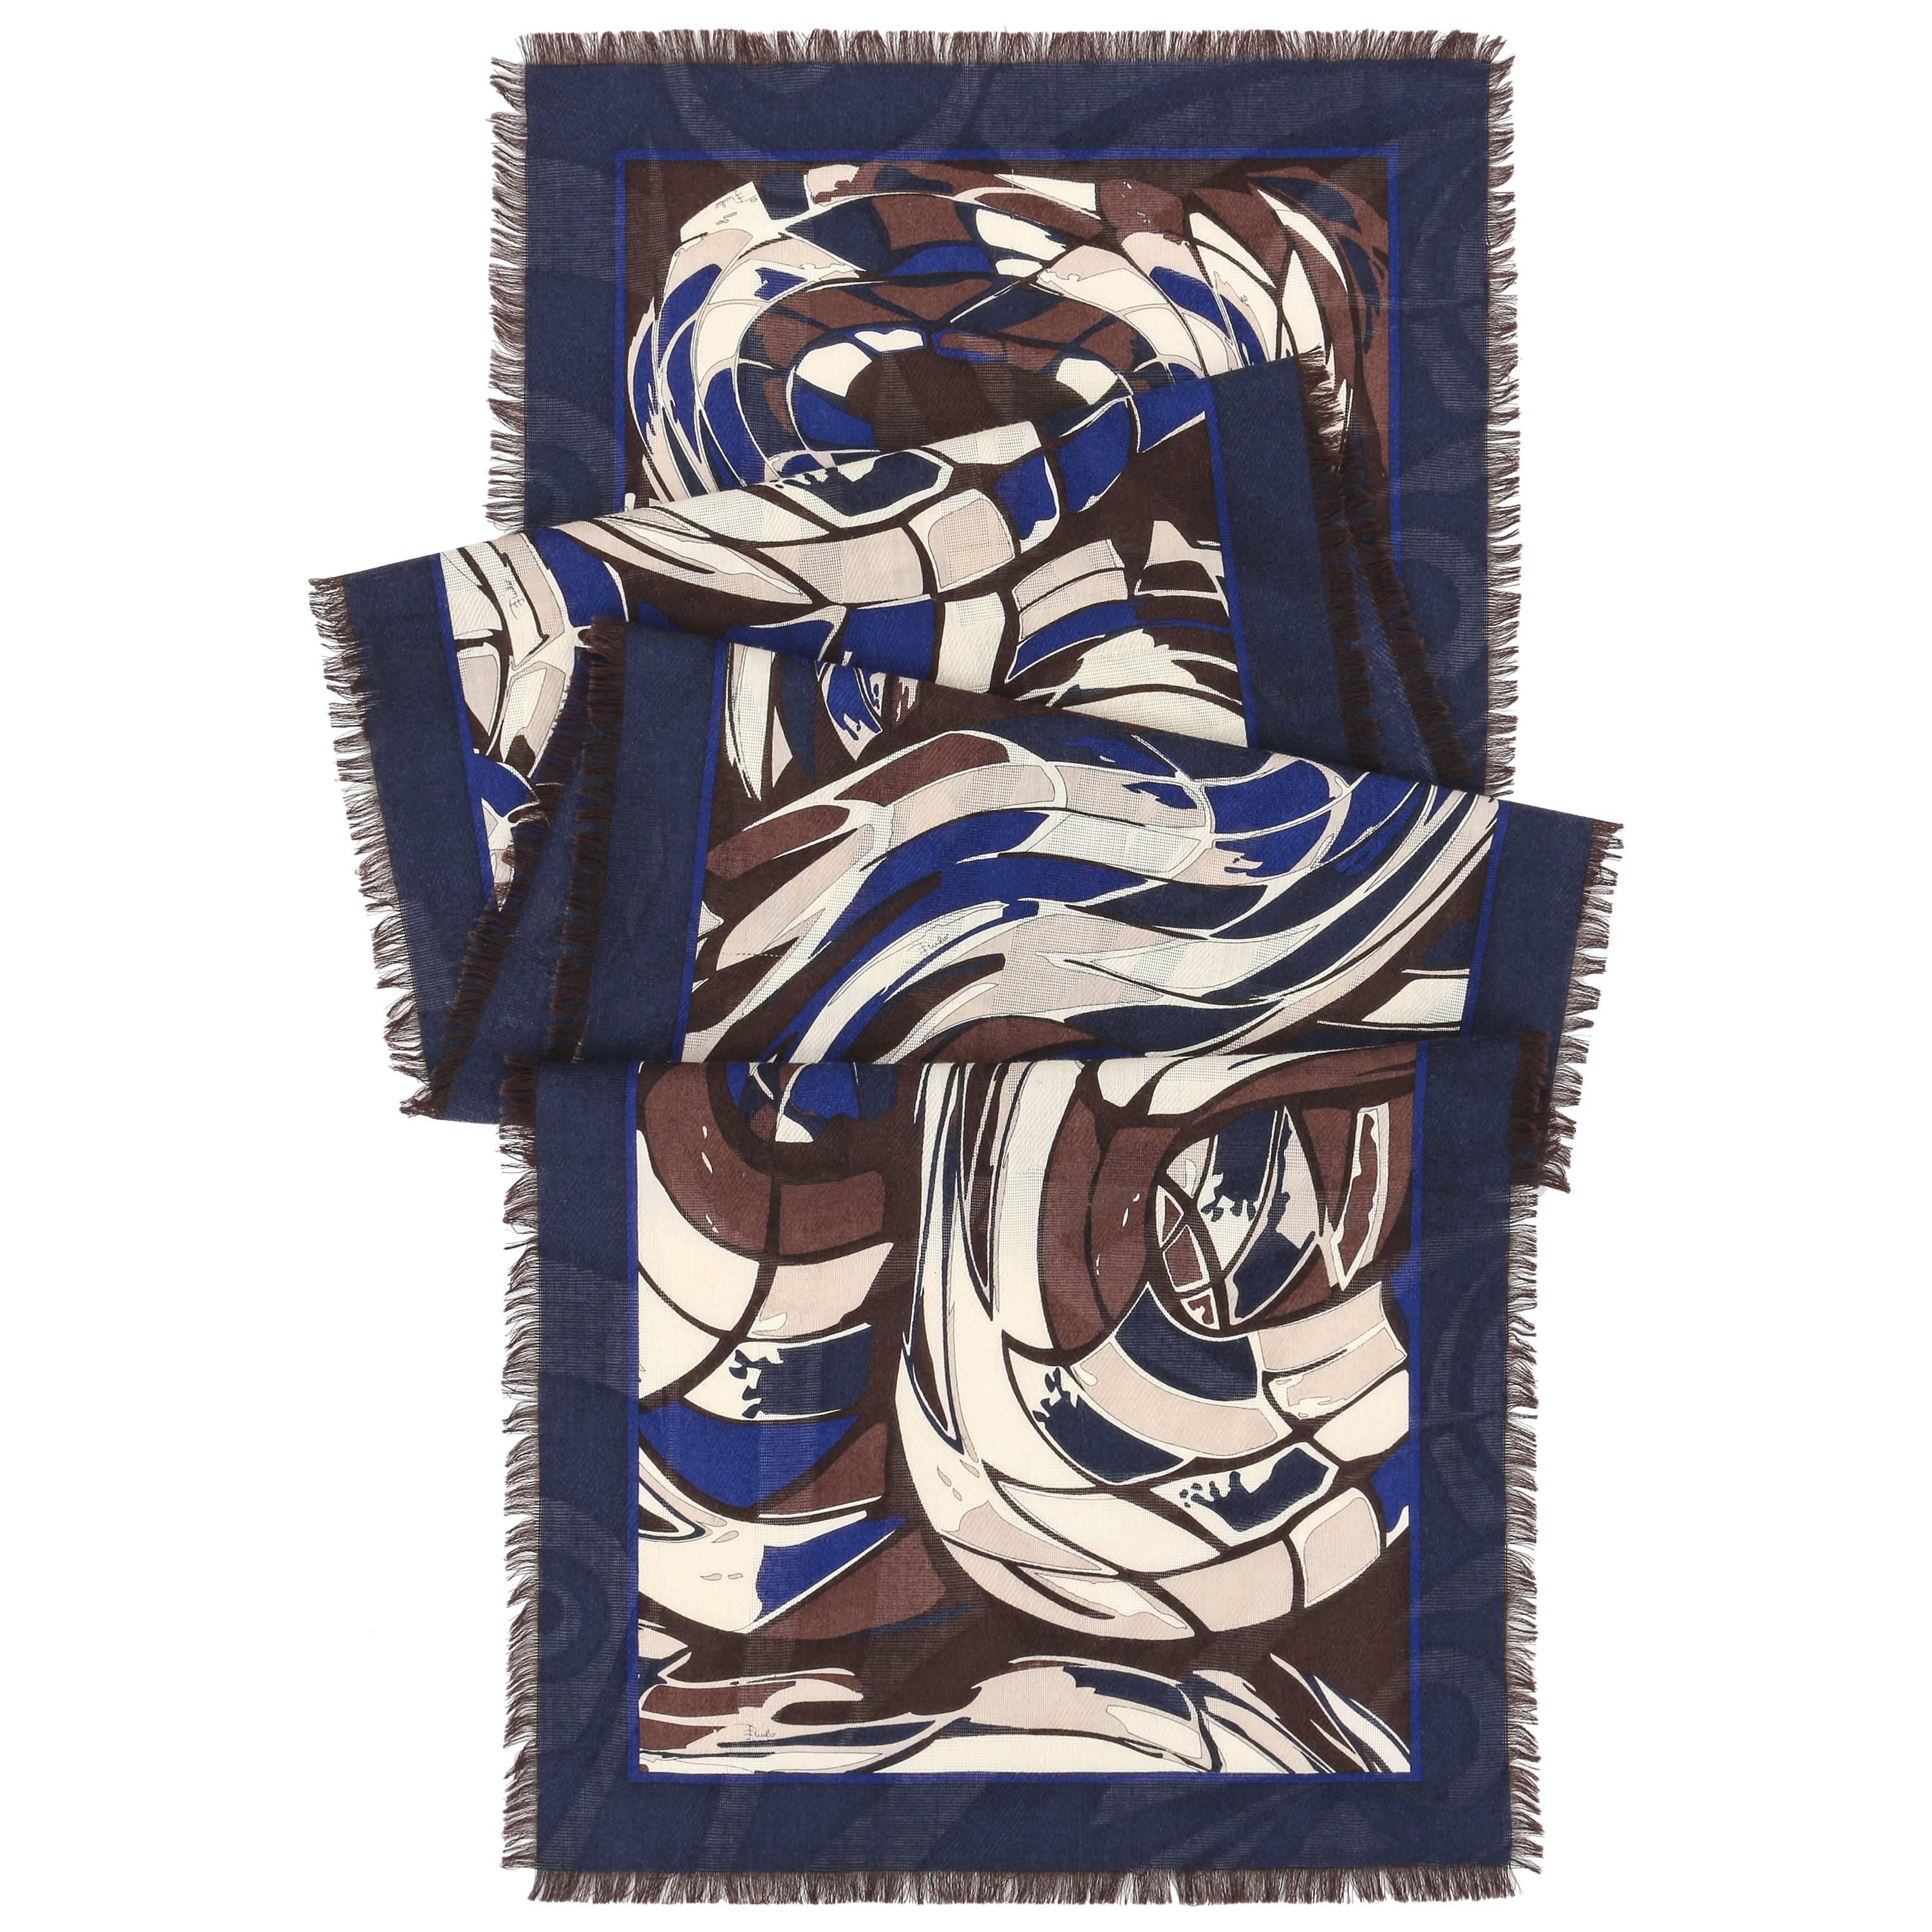 EMILIO PUCCI Wool Silk Multicolor Abstract Signature Print Oblong Scarf